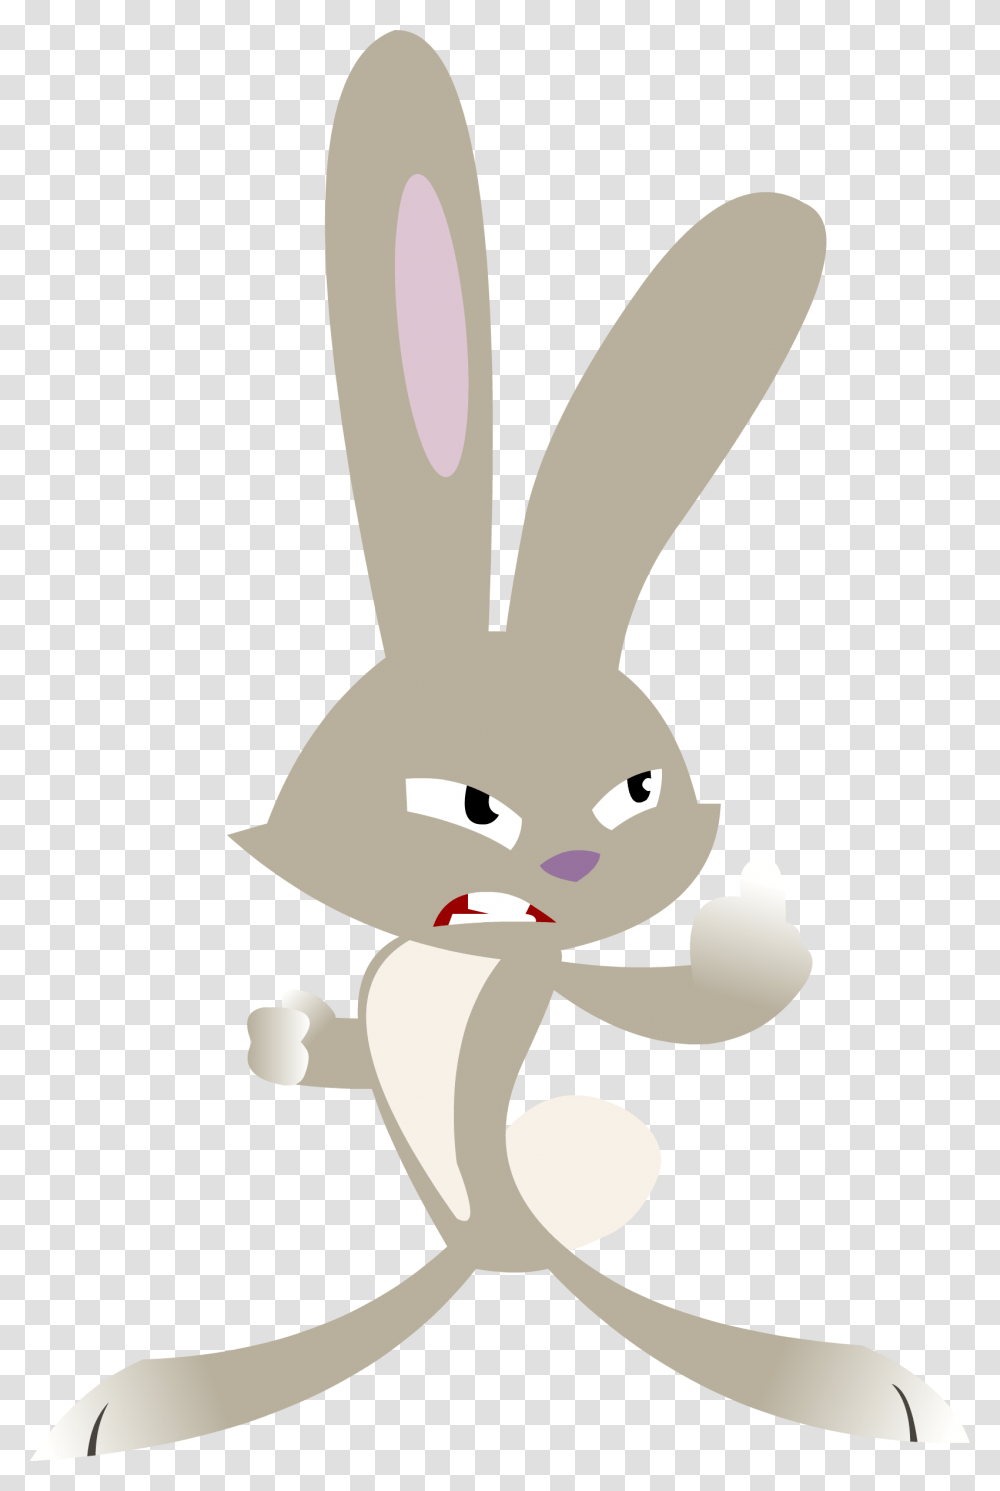 Rabbit Is Mad Vector By Shayla567 D56kf60 Skunk Fu Rabbit, Snowman, Outdoors, Nature, Animal Transparent Png